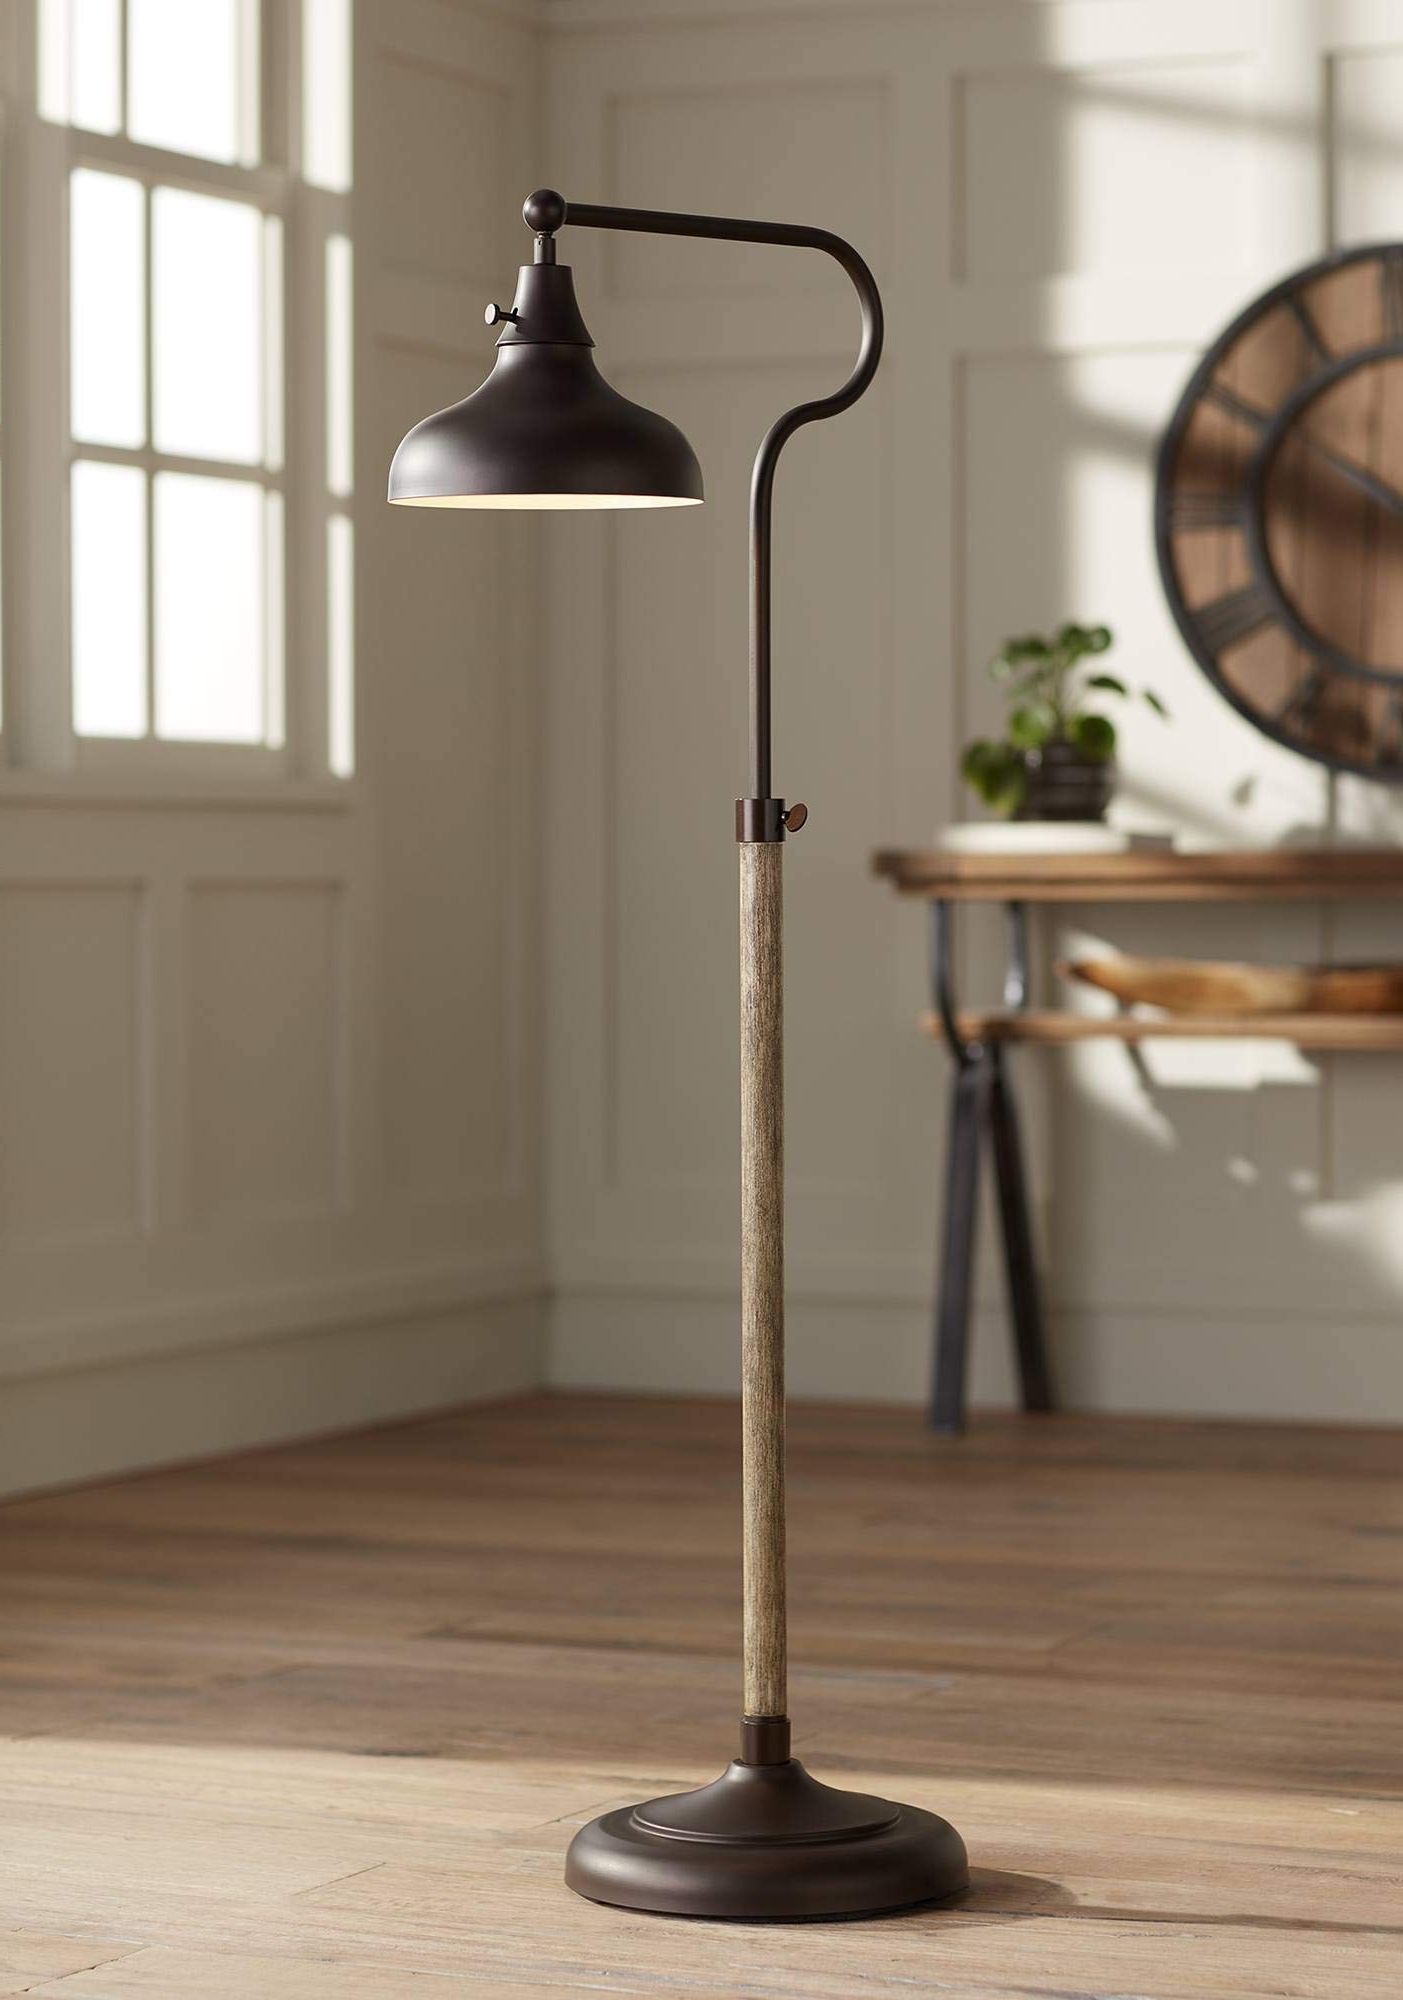 Rustic Standing Lamps In Well Liked Franklin Iron Works Ferris Industrial Rustic Farmhouse Adjustable Pharmacy Floor  Lamp Downbridge 57" Tall Bronze Faux (View 5 of 15)